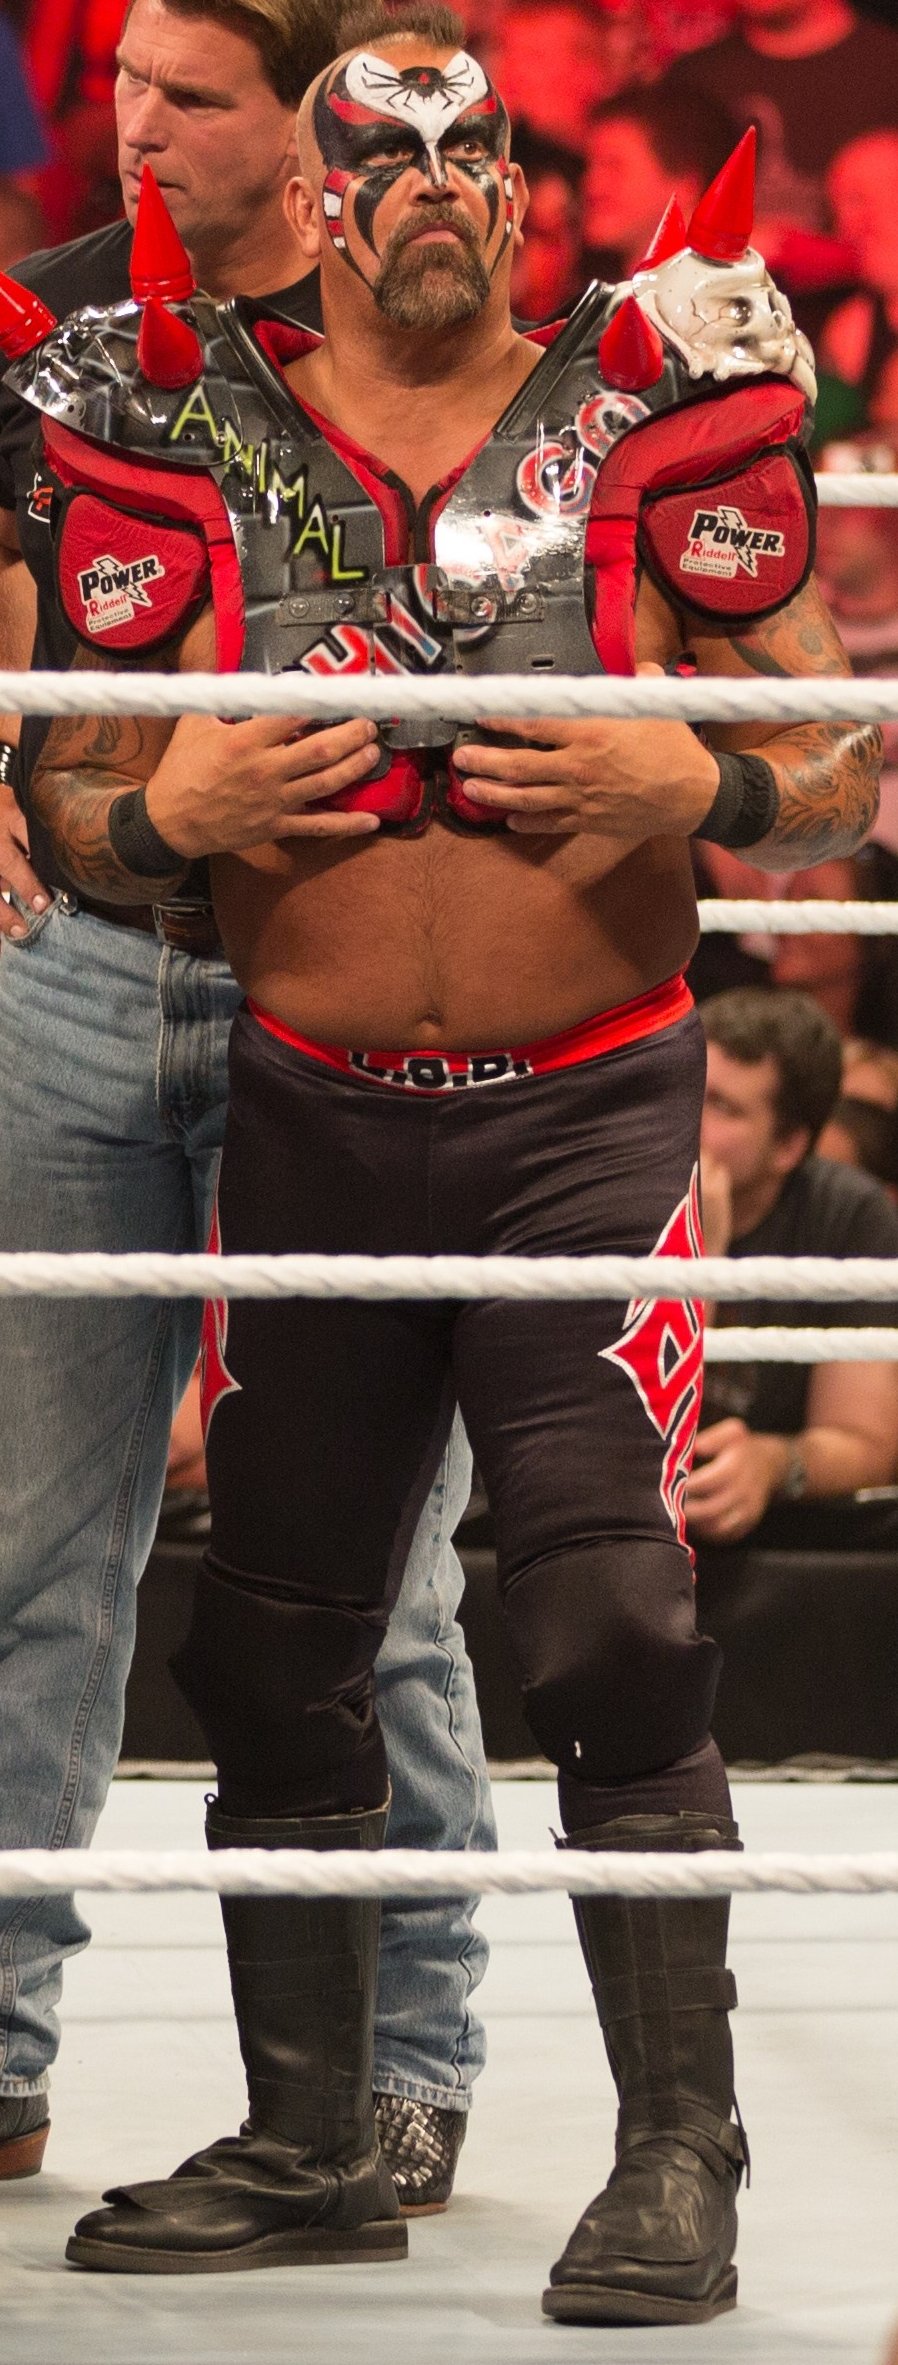 Wrestler, Road Warrior Animal during a WWE event on July 23, 2012. | Photo: Xander Hieken, CC BY-SA 2.0, Wikimedia Commons 